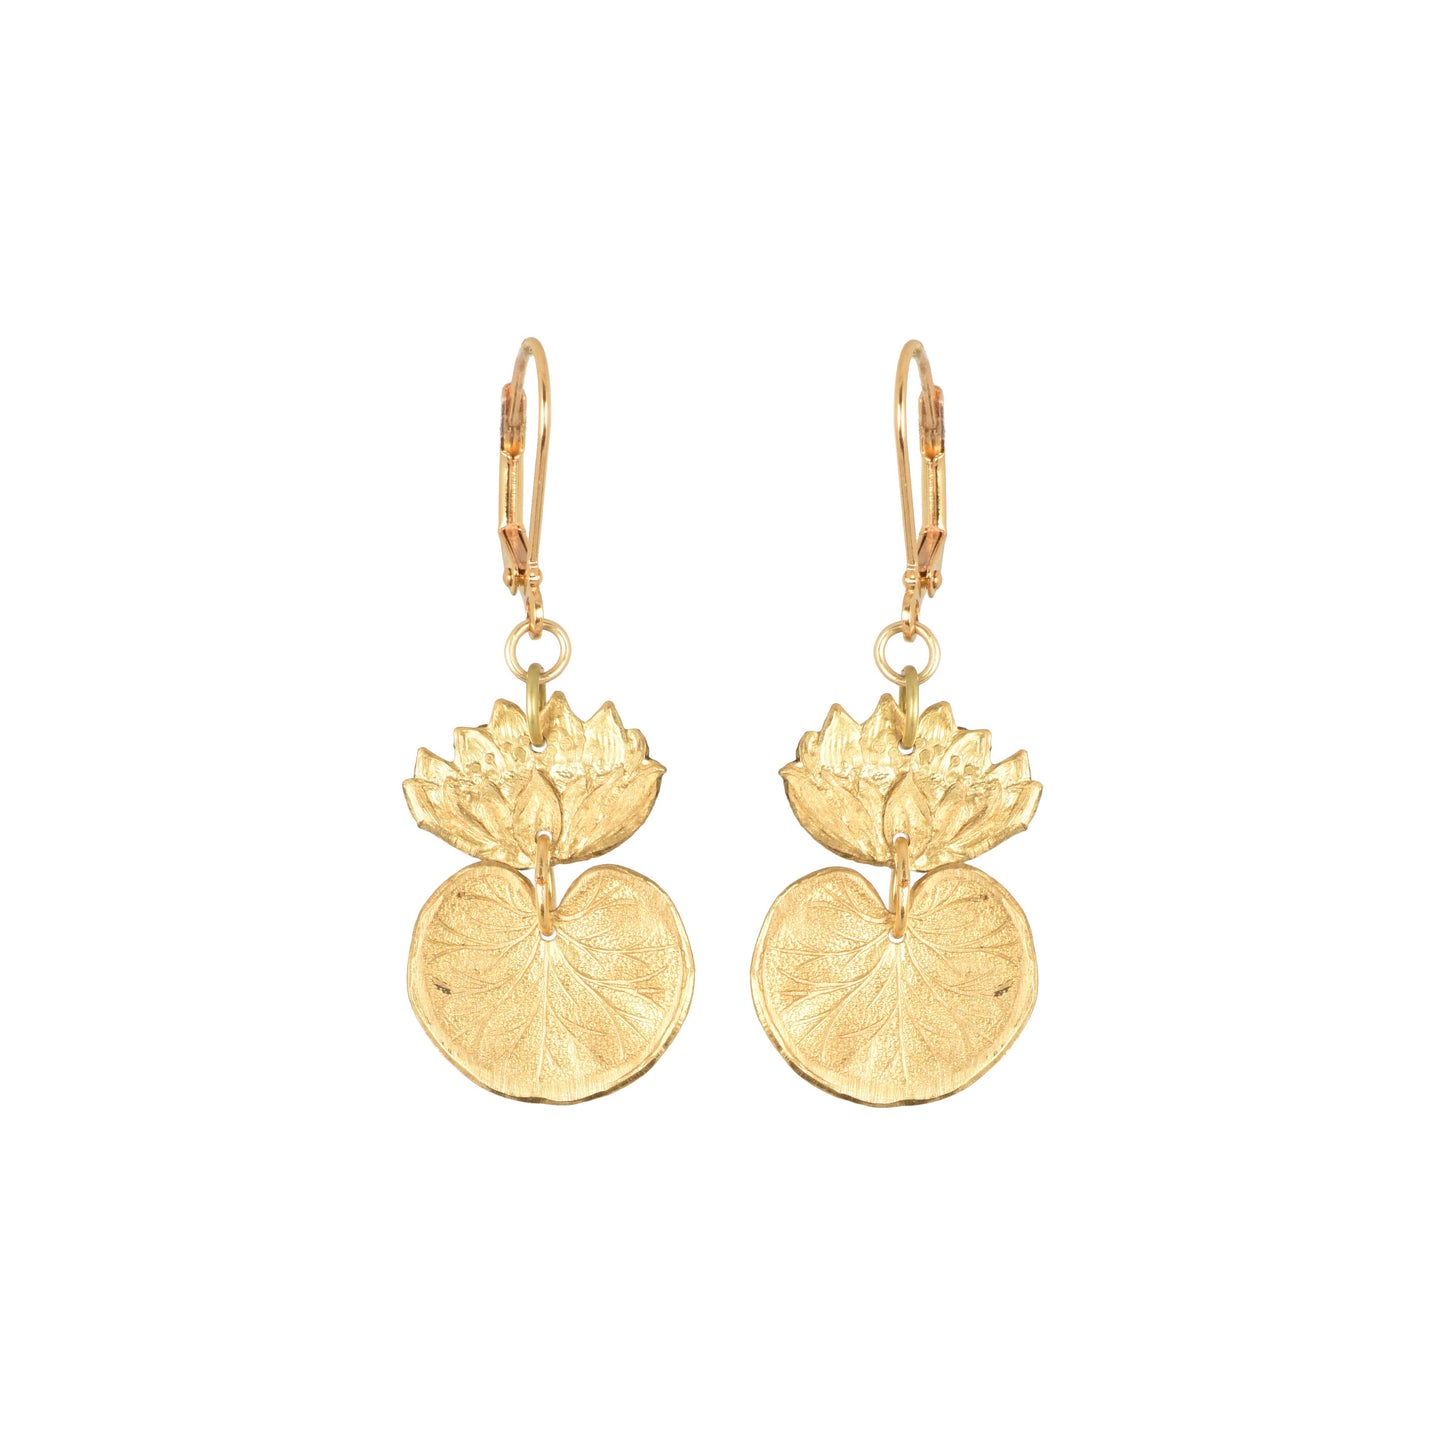 We Dream in Colour - Gold Waterlily Earrings